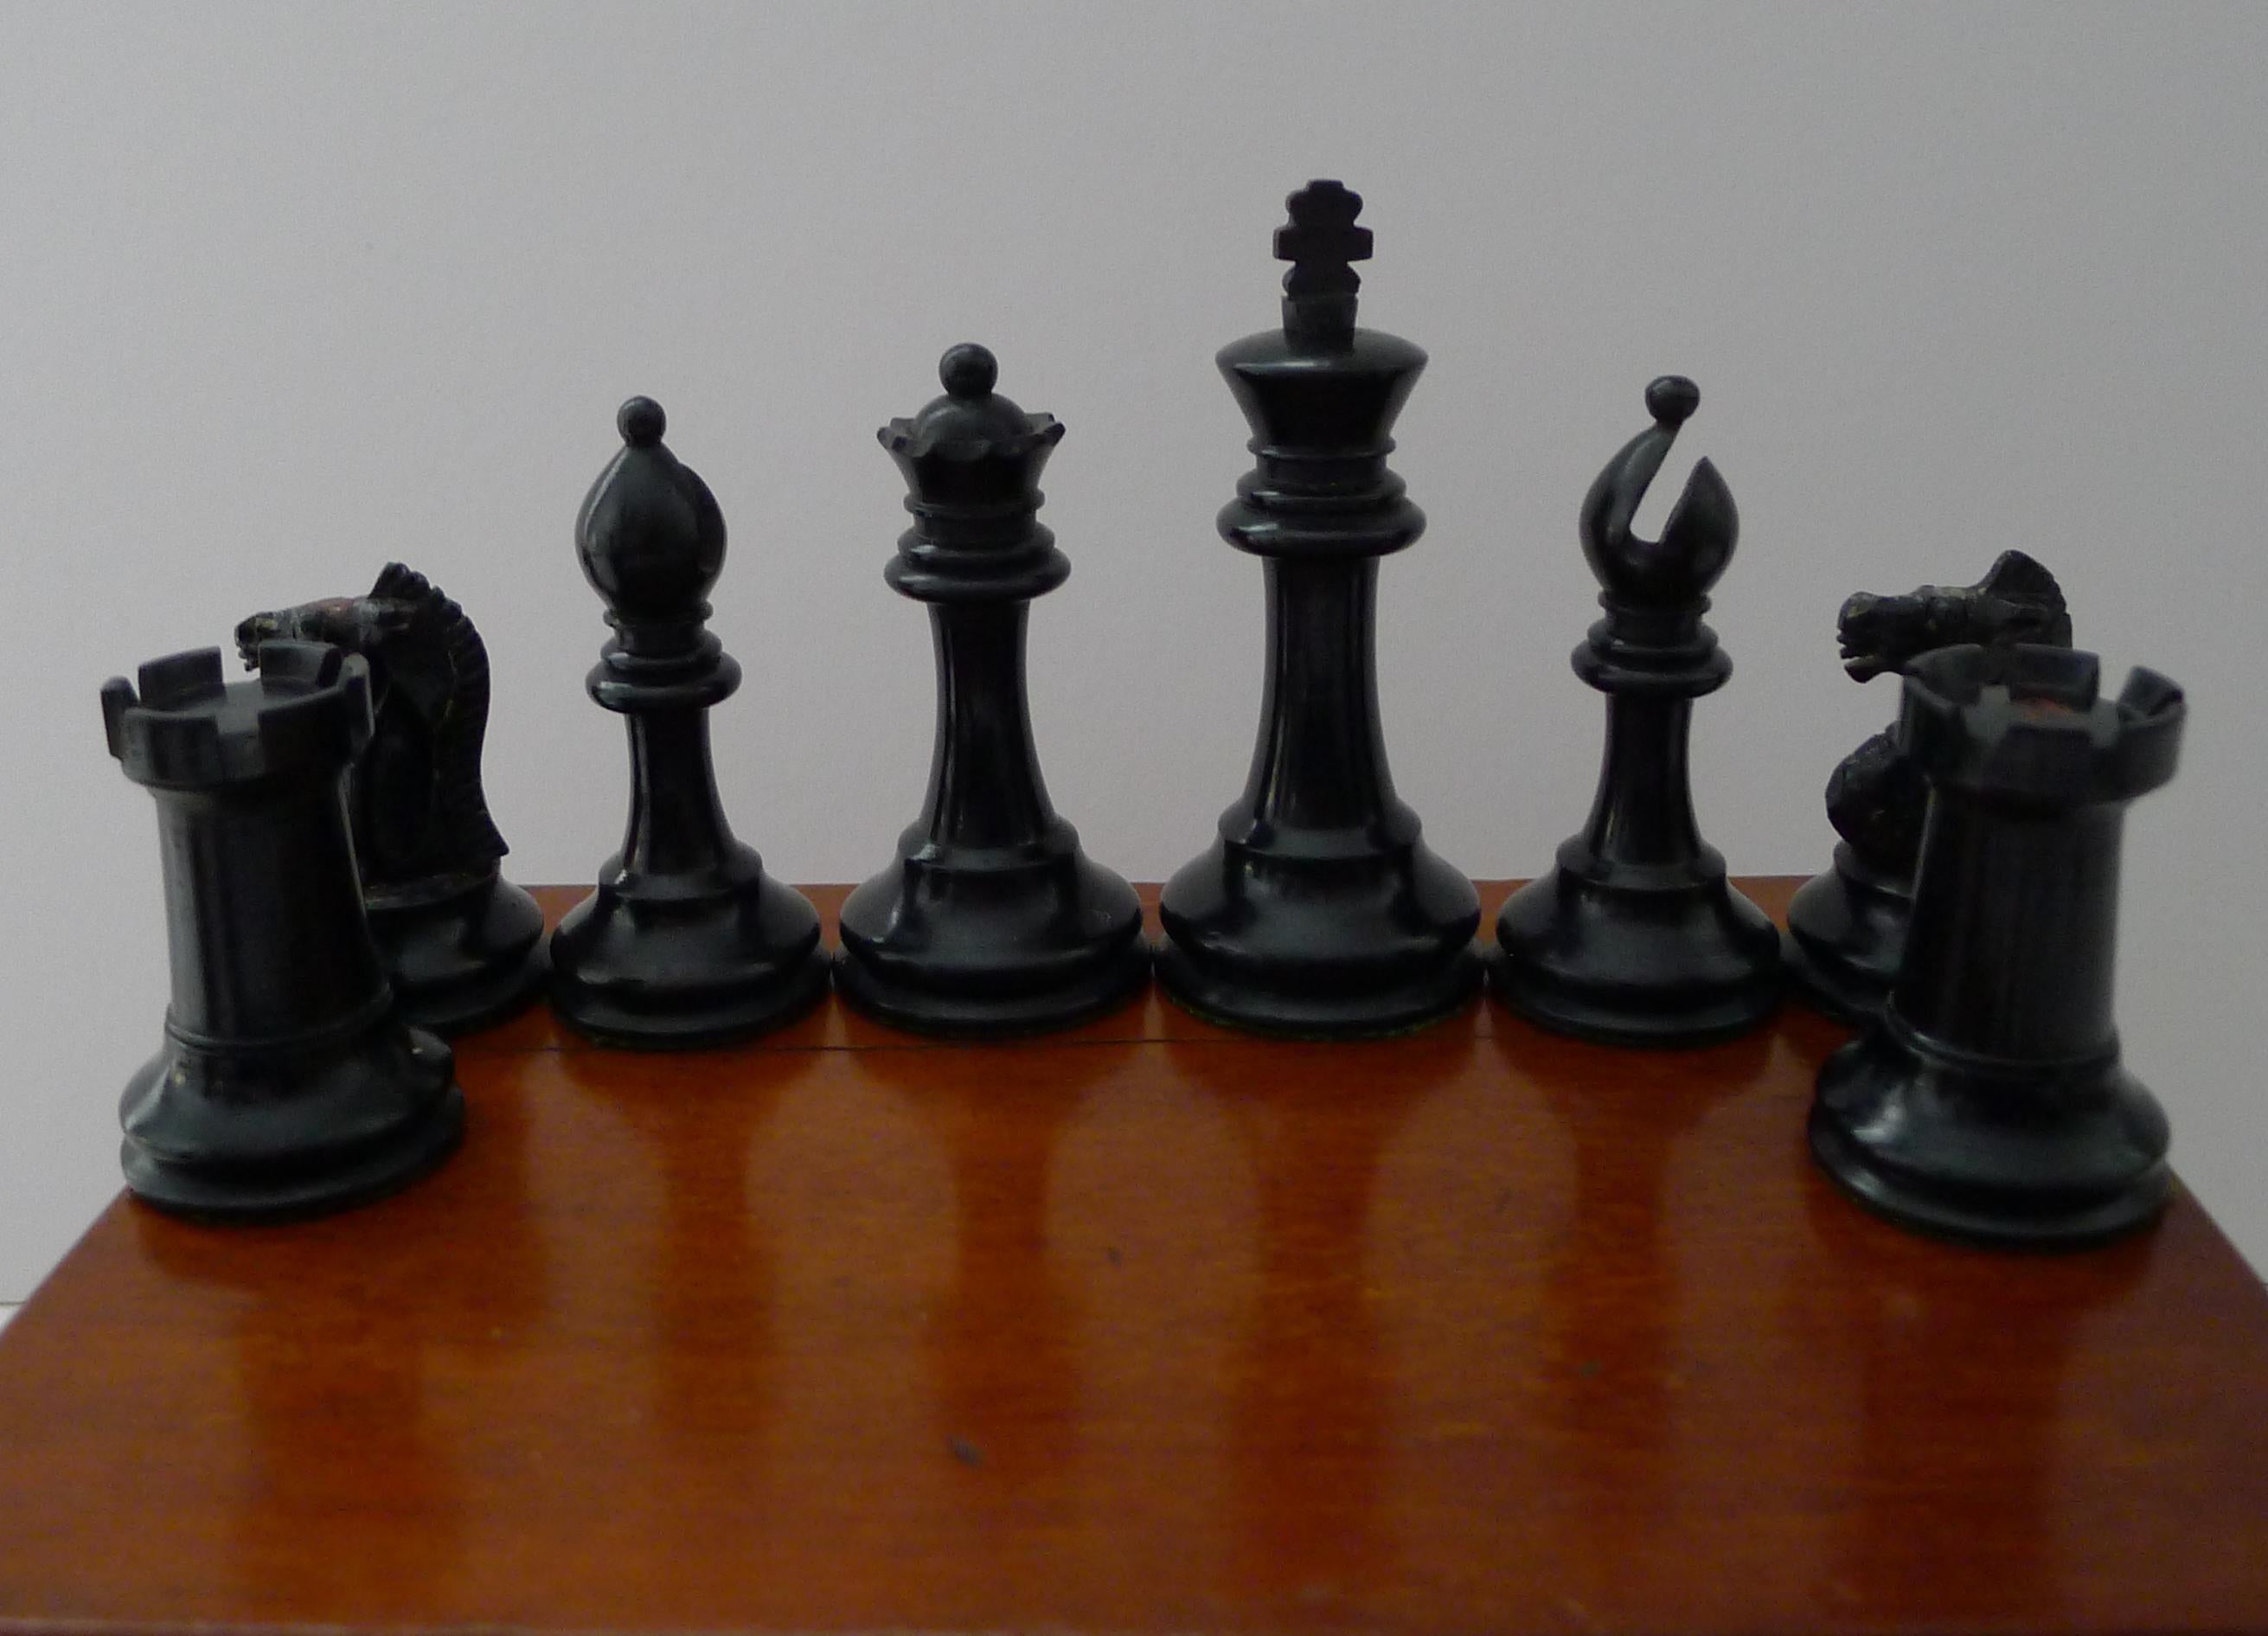 Antique English Staunton Chess Set With Red Crown Marks c.1900 In Good Condition For Sale In Bath, GB